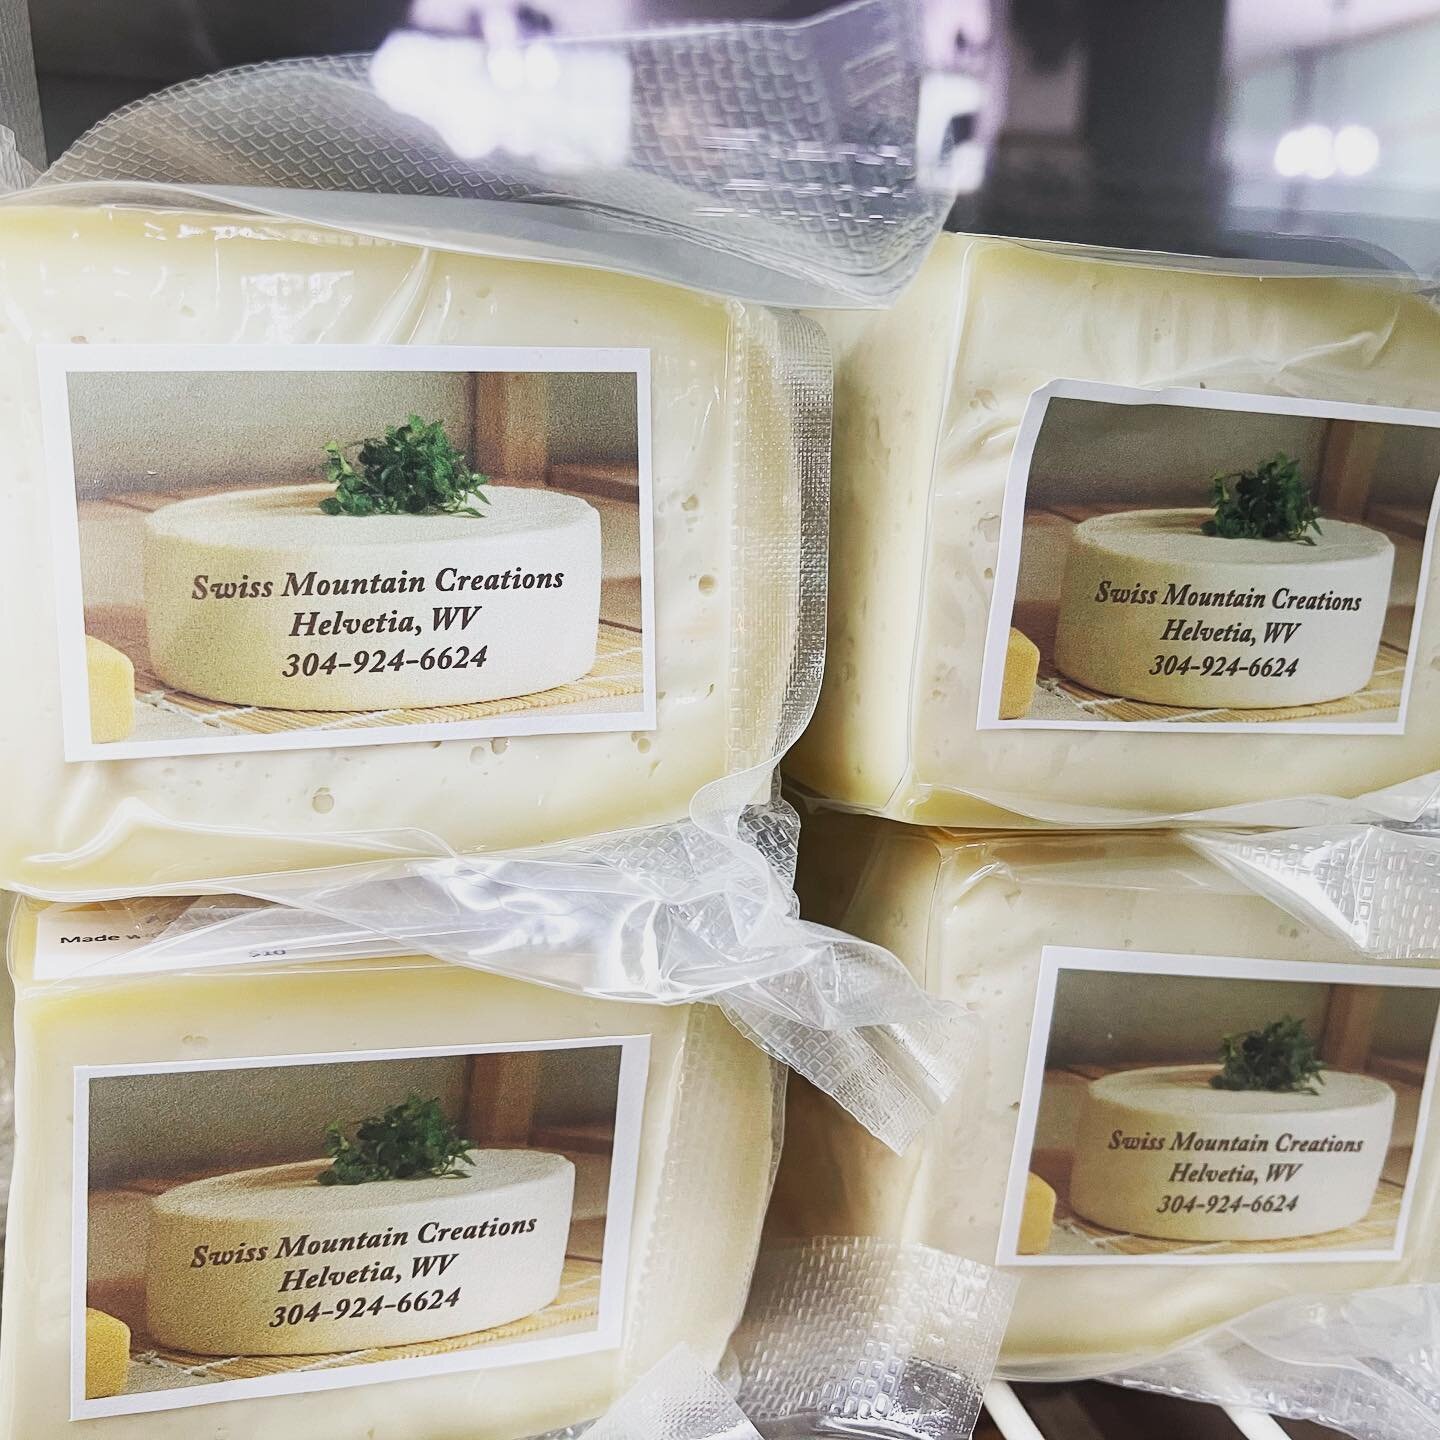 IT IS HERE!!! WE ARE SELLING DELICIOUS HELVETIA SWISS CHEESE and homemade butter made by SWISS MOUNTAIN CREATIONS of Helvetia, West Virginia!! We are so happy to be a part of this wonderfully  incredible community tradition!!! You can have some just 